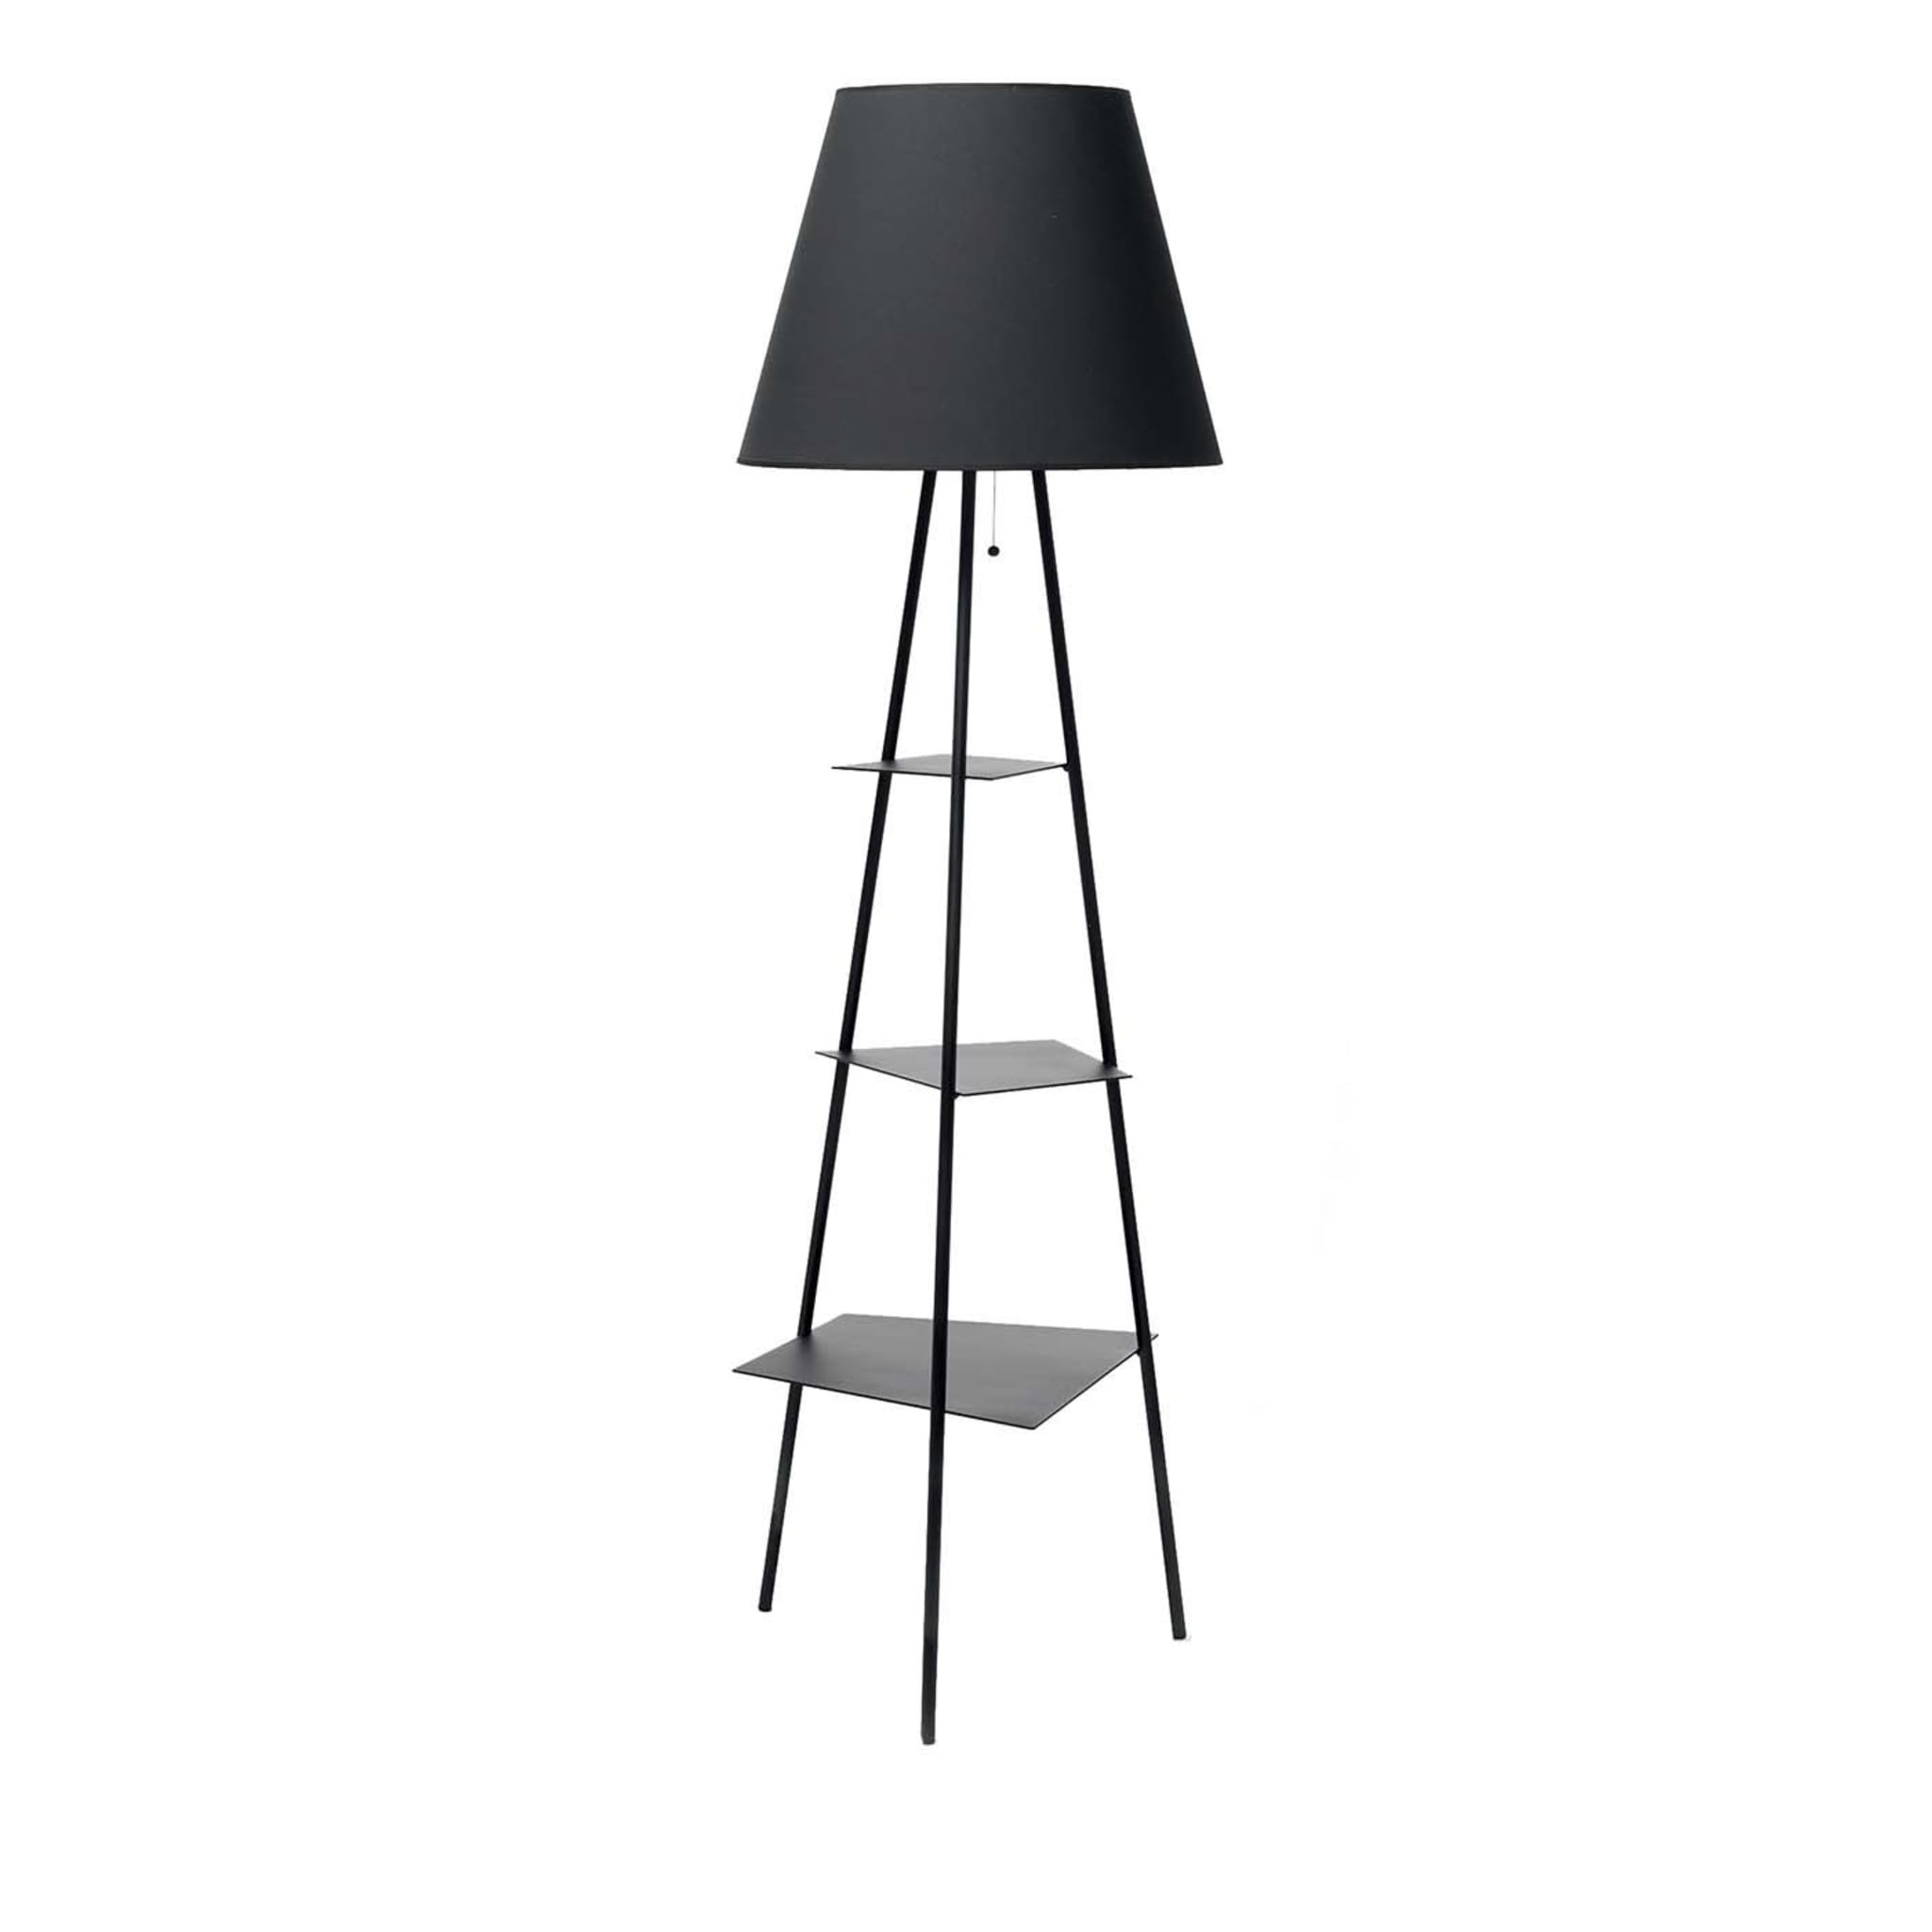 TRI.BE.CA Floor Lamp by Marzia and Leonardo Dainelli - Main view